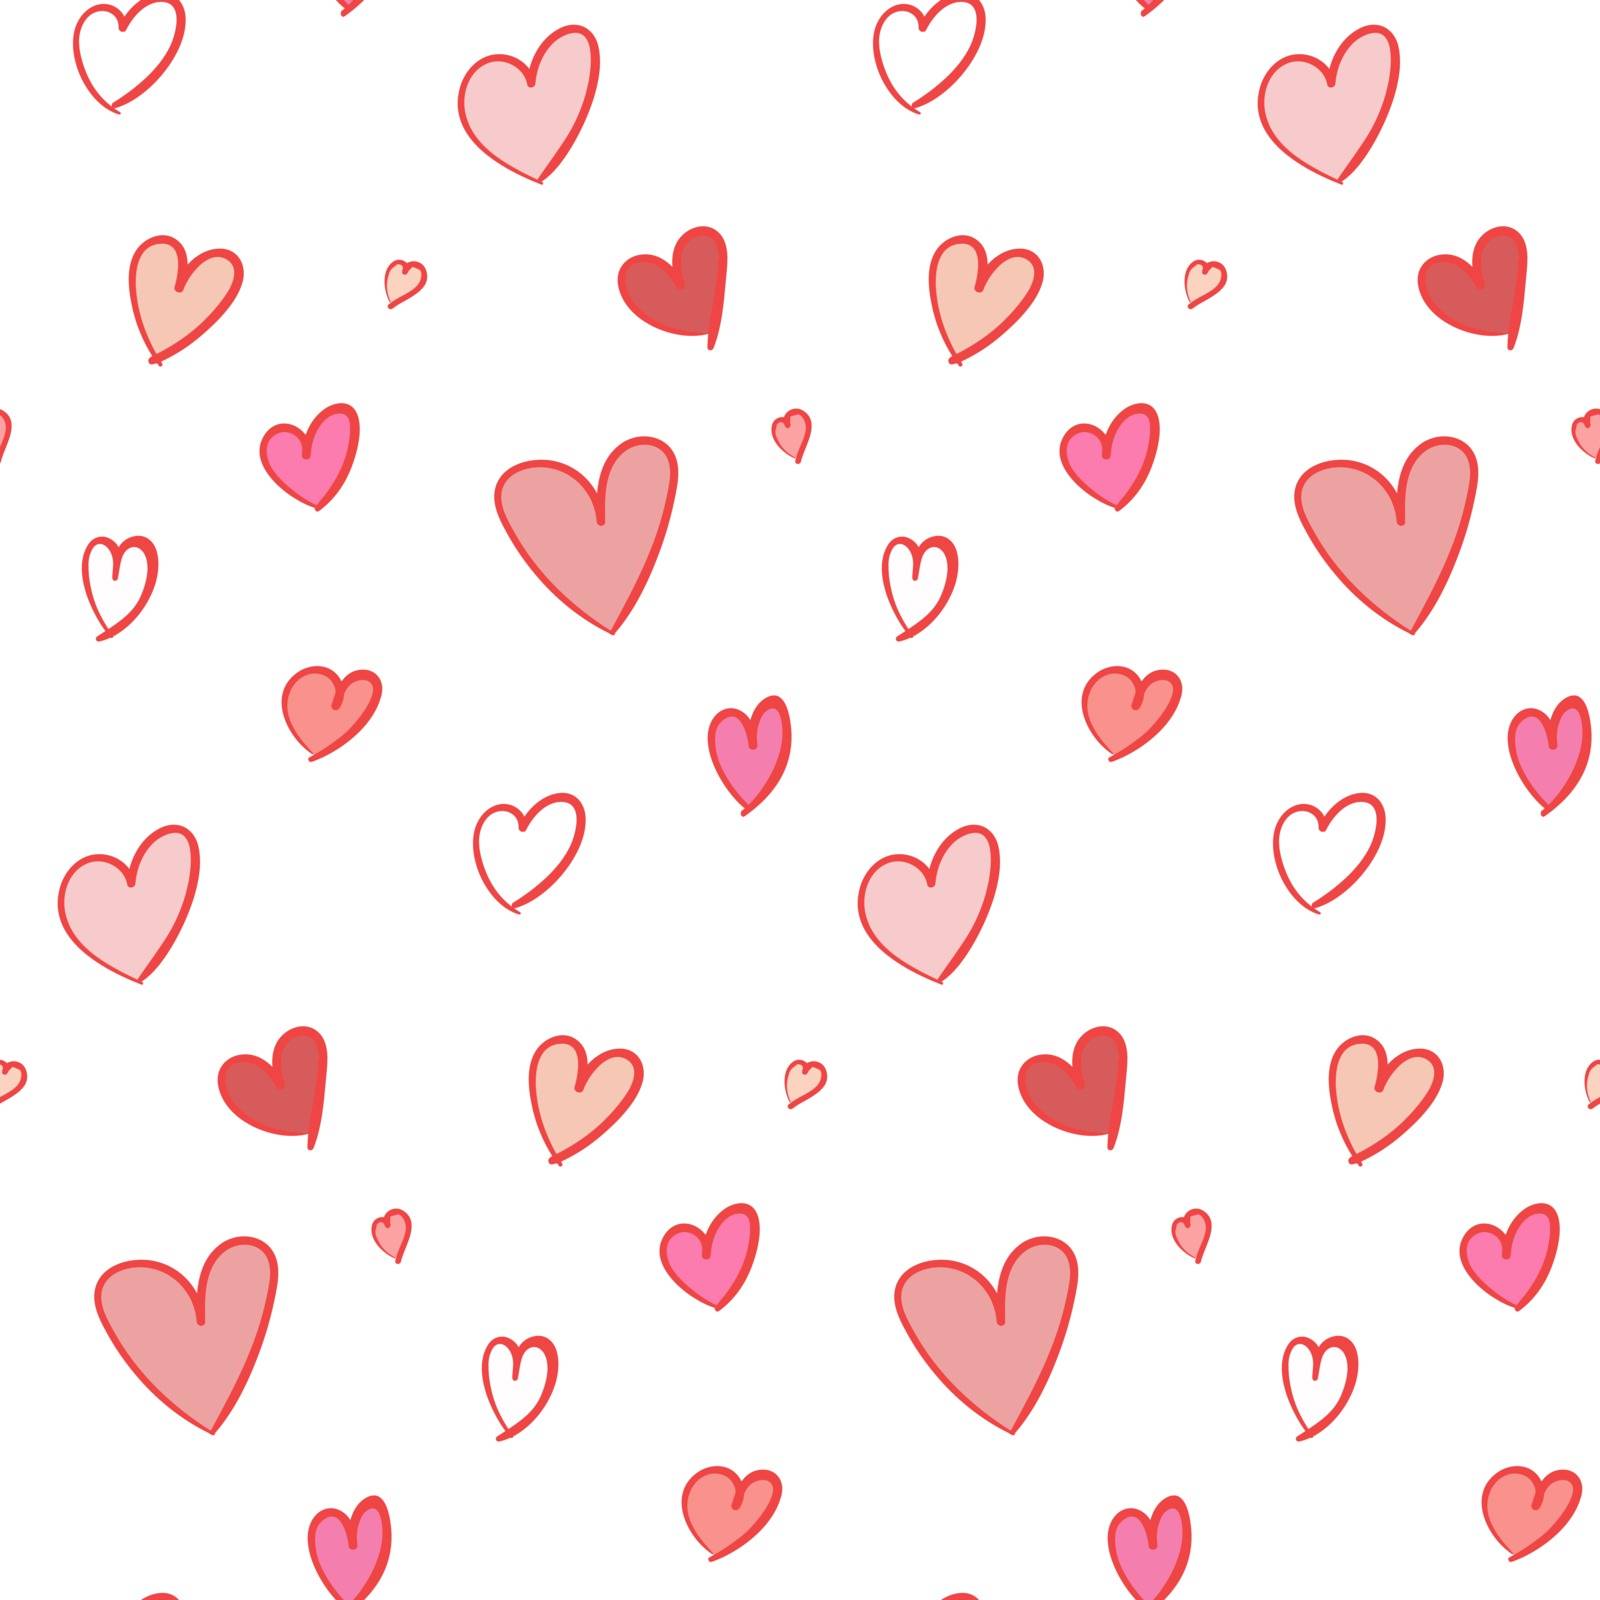 Lovely seamless pattern with hand drawn hearts by tatahnka